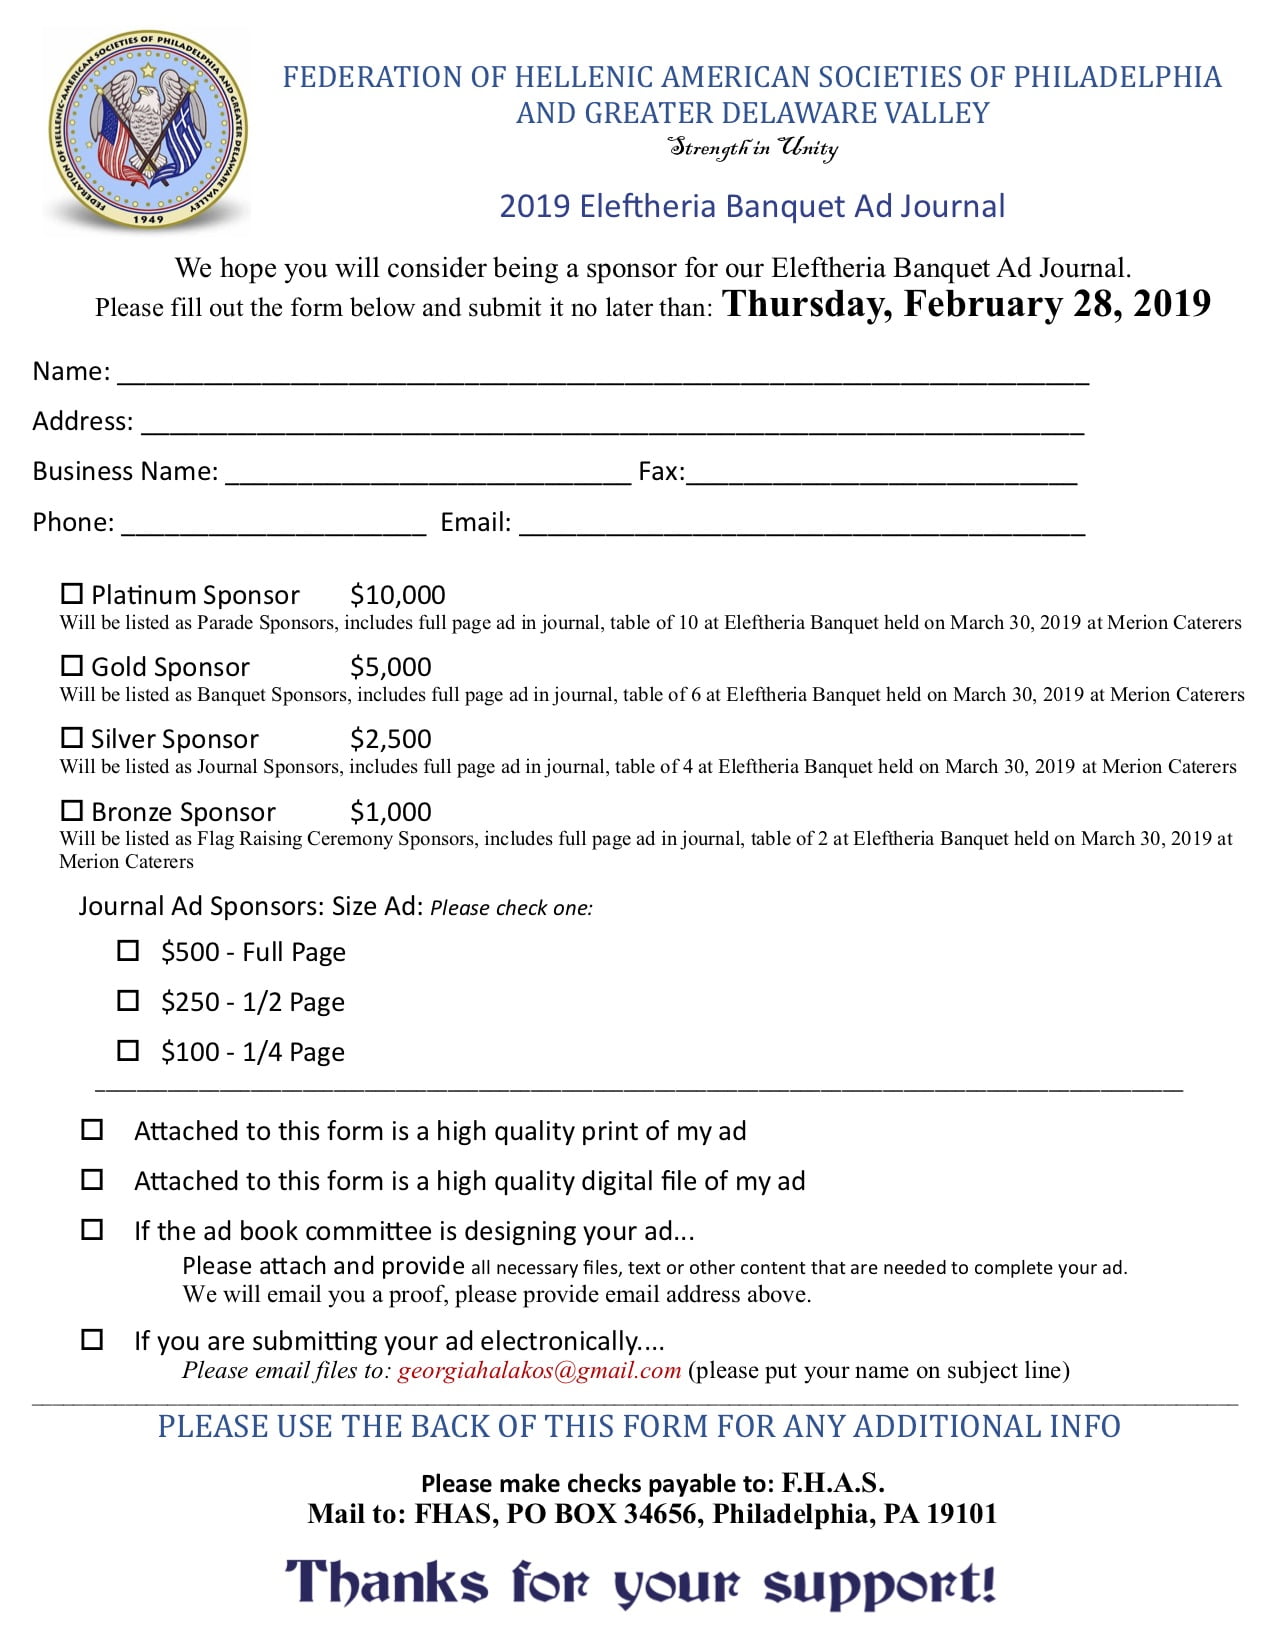 Eleftheria Banquet Ad Journal Sponsorship Submission Form